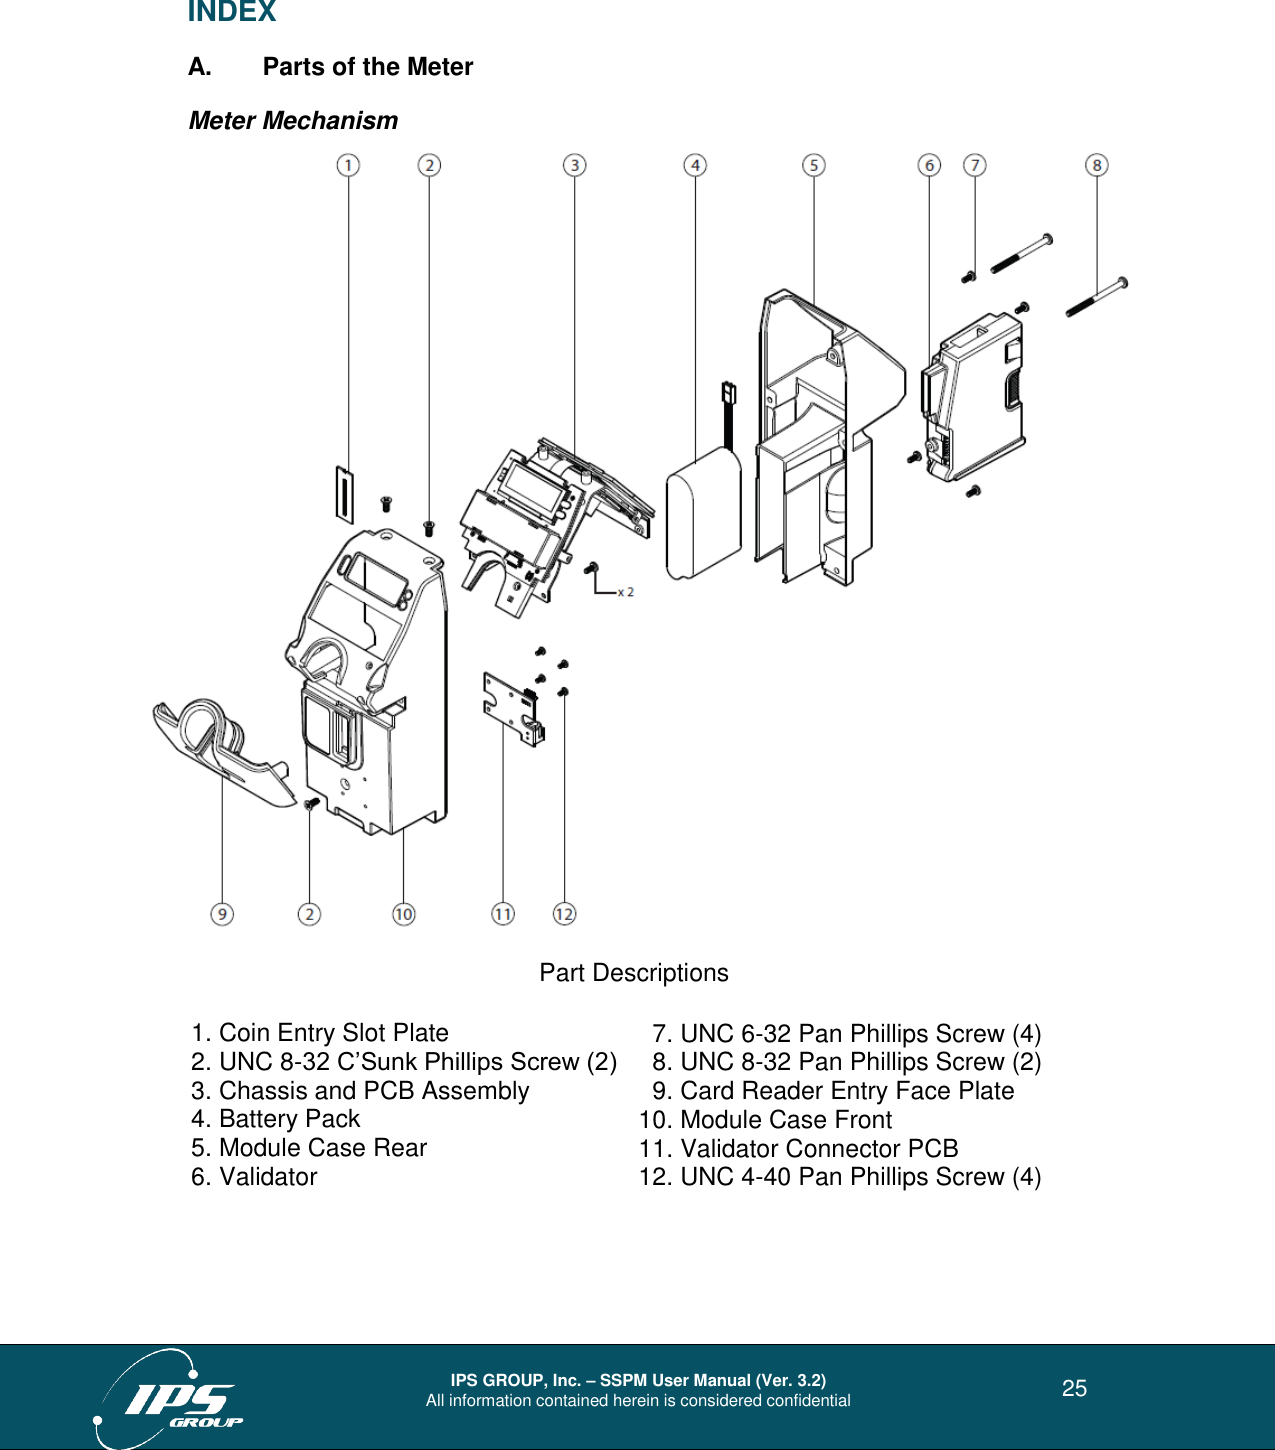  IPS GROUP, Inc. – SSPM User Manual (Ver. 3.2) All information contained herein is considered confidential   25 INDEX A.  Parts of the Meter Meter Mechanism    7. UNC 6-32 Pan Phillips Screw (4)   8. UNC 8-32 Pan Phillips Screw (2)   9. Card Reader Entry Face Plate 10. Module Case Front 11. Validator Connector PCB 12. UNC 4-40 Pan Phillips Screw (4)  1. Coin Entry Slot Plate 2. UNC 8-32 C’Sunk Phillips Screw (2) 3. Chassis and PCB Assembly 4. Battery Pack 5. Module Case Rear 6. Validator Part Descriptions 